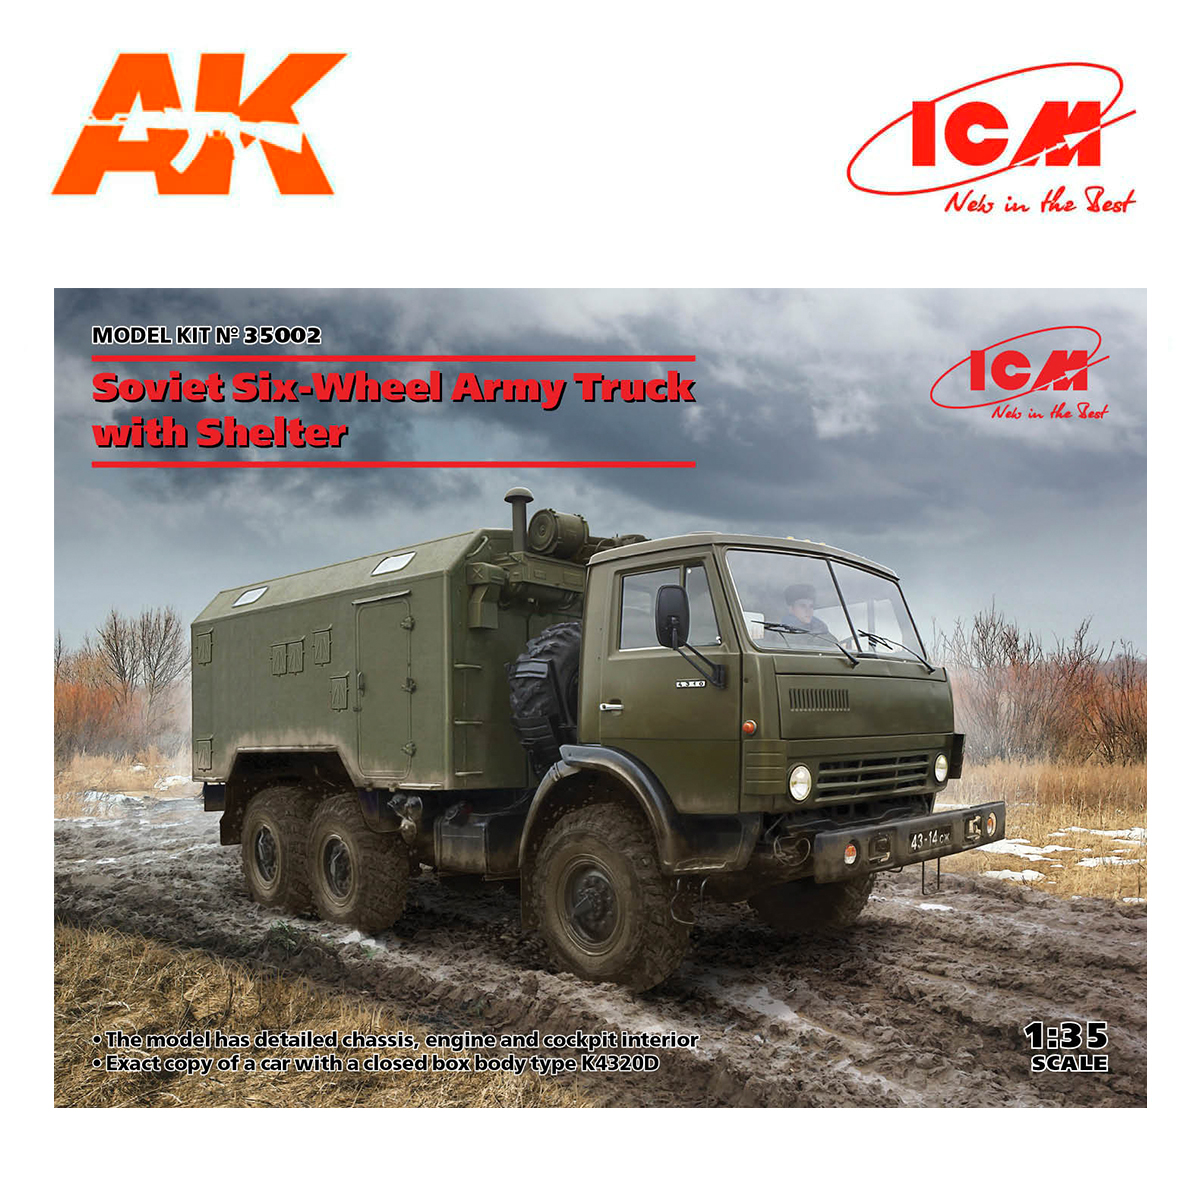 Soviet Six-Wheel Army Truck with Shelter 1/35